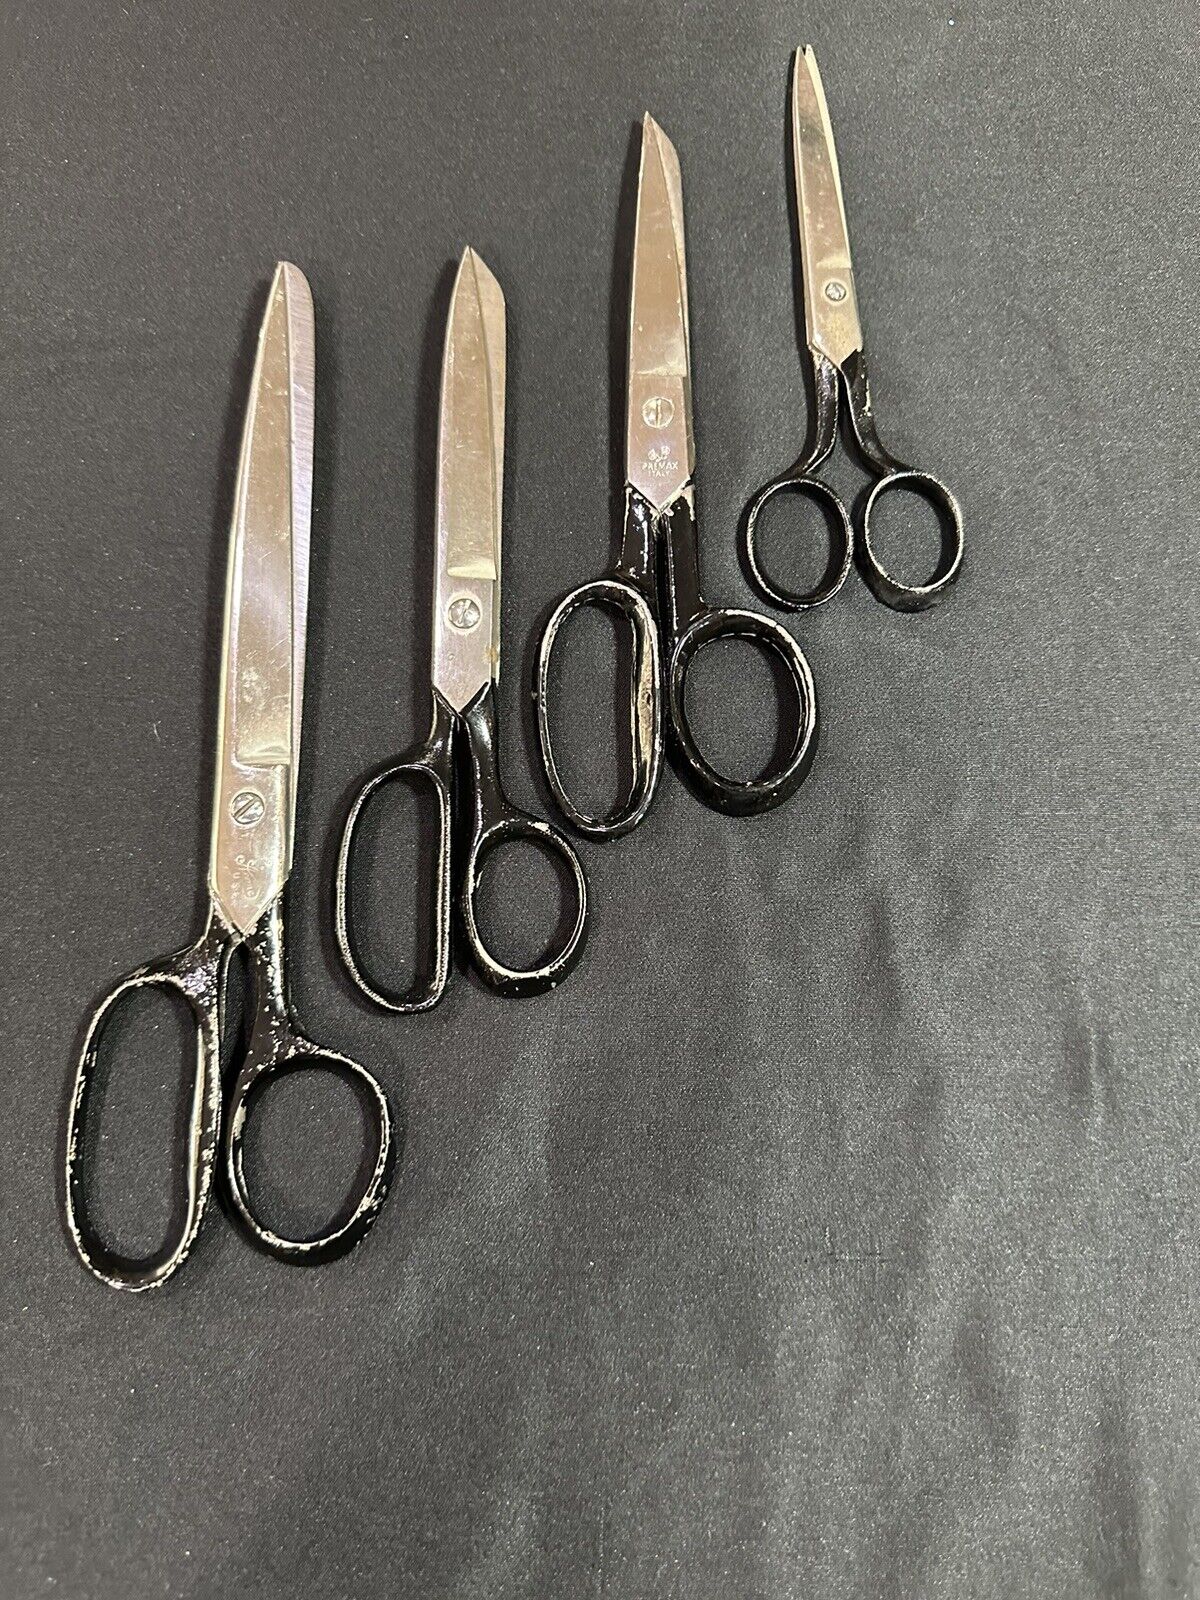 4 Pairs Vintage Antique Scissors Forged Steel Black Handle USA & Italy